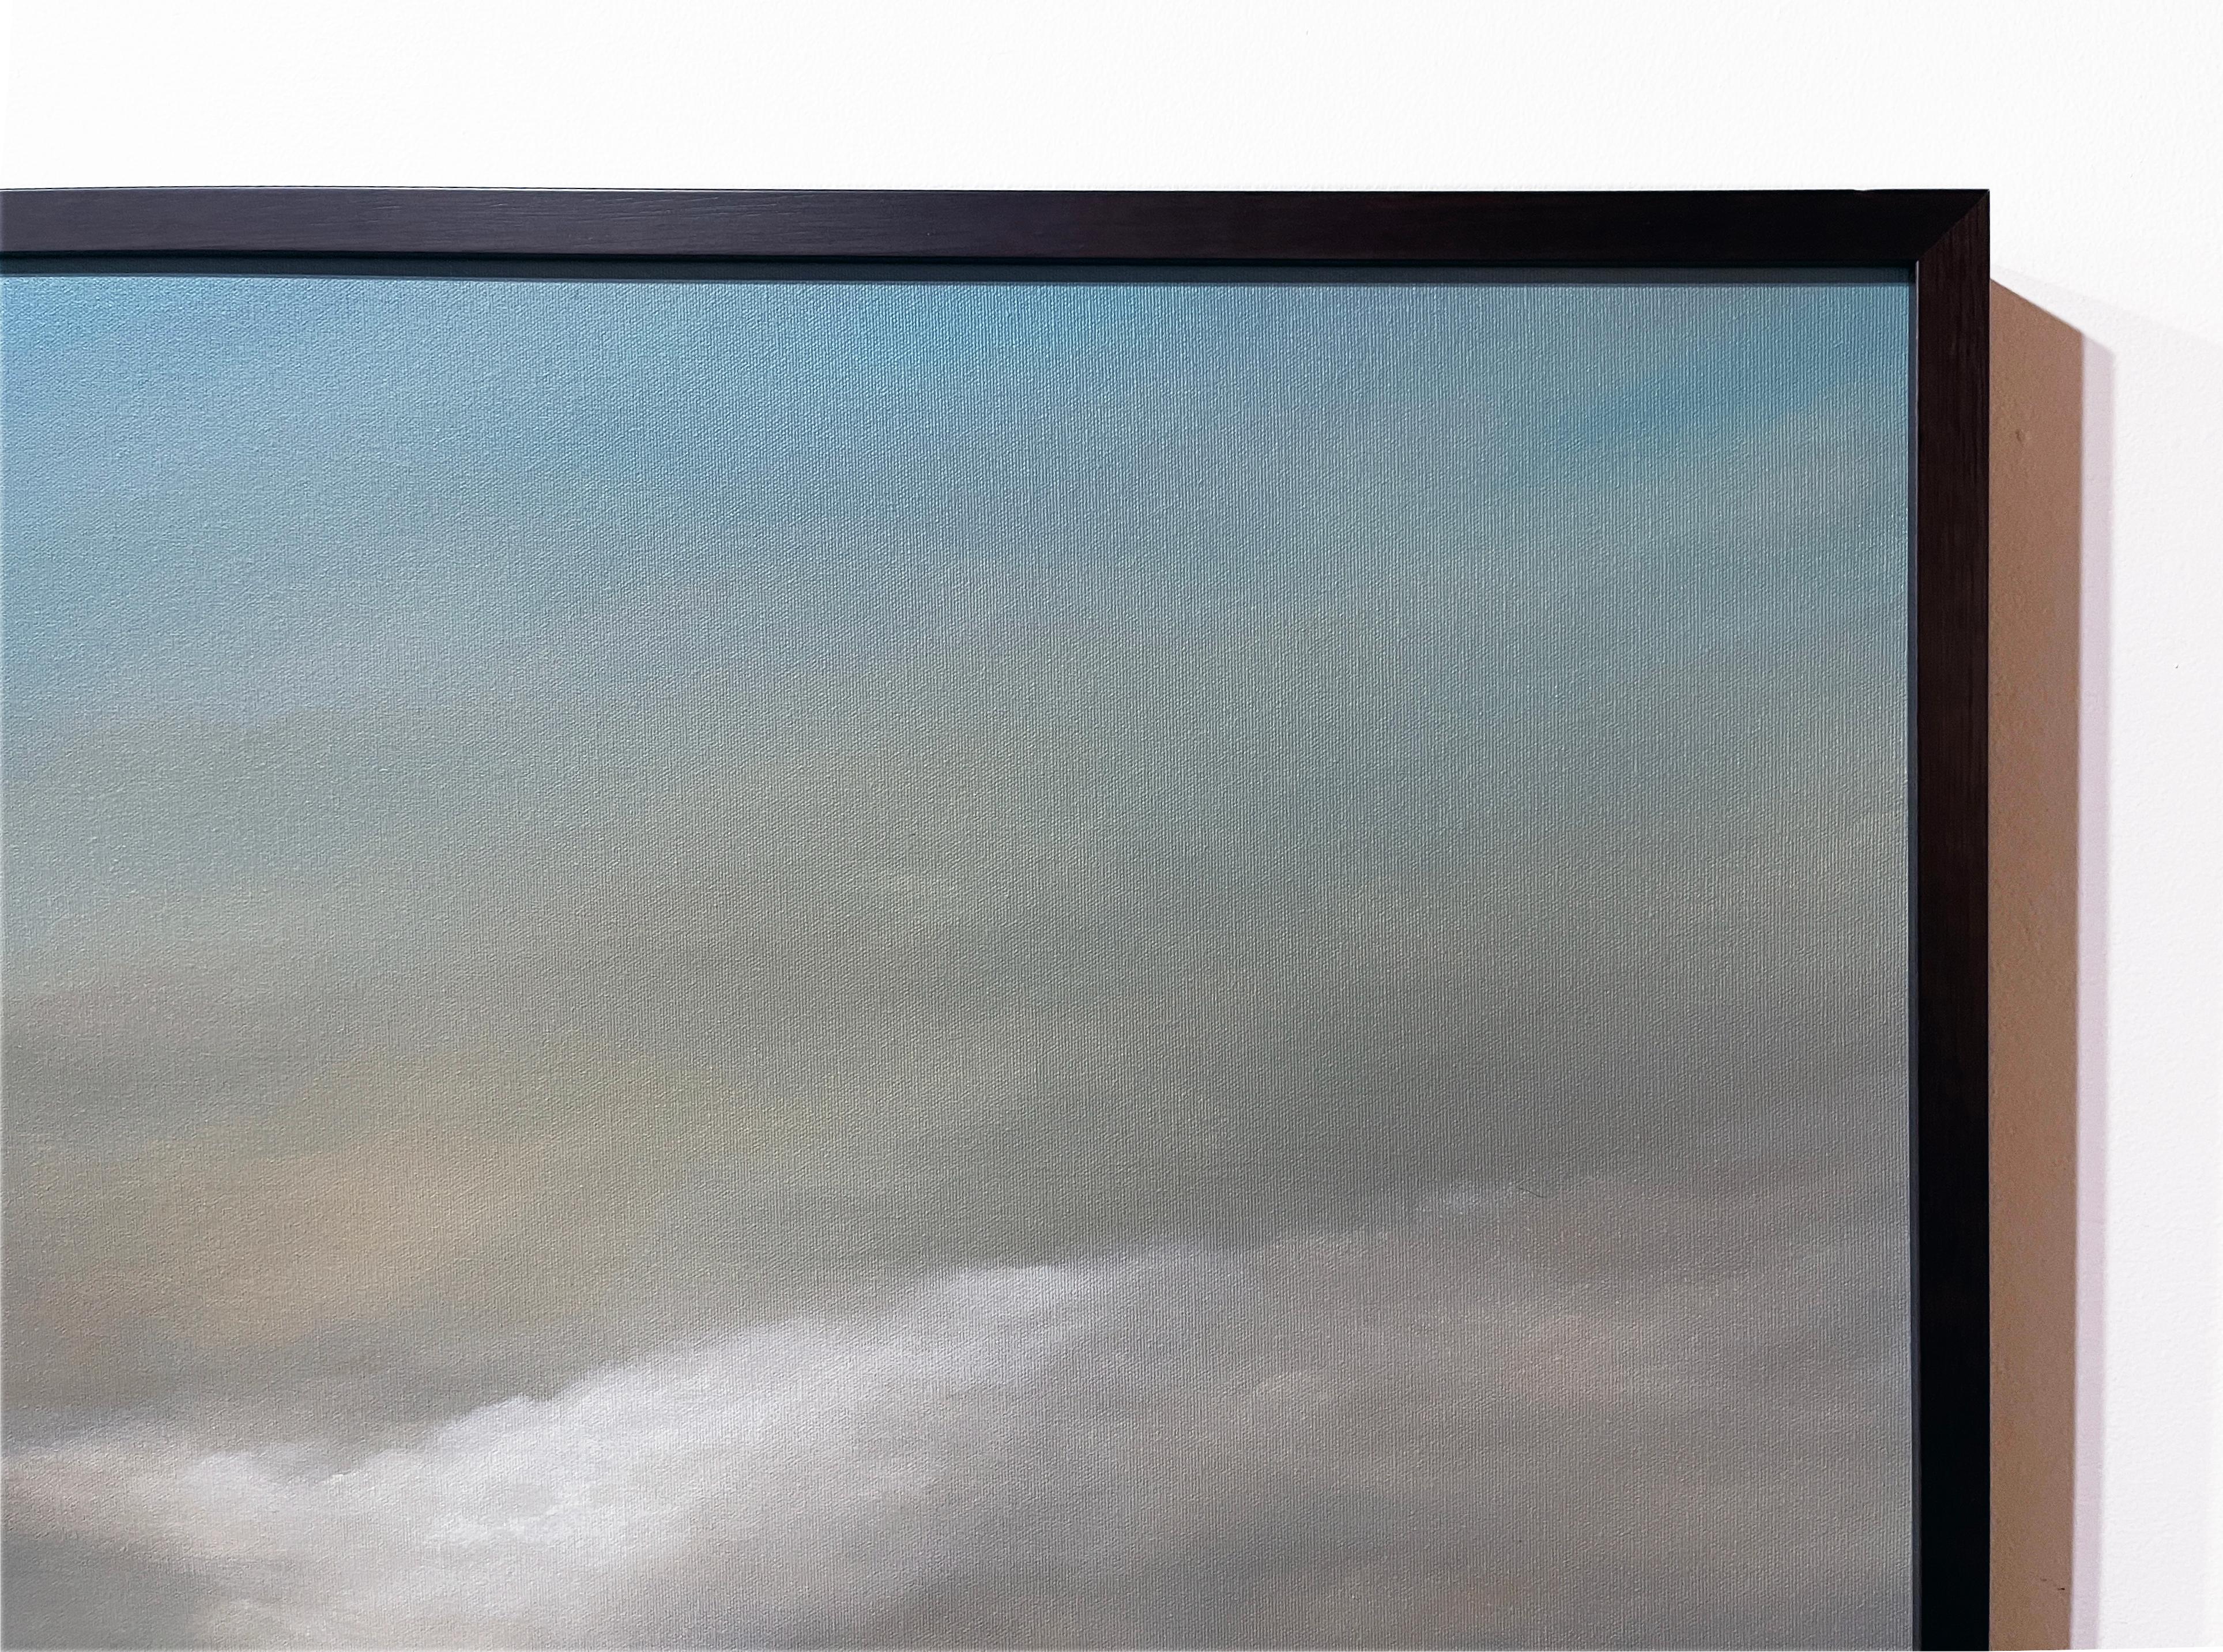 Ascending Light - Original Oil Painting with Dramatic Sky and Landscape 1